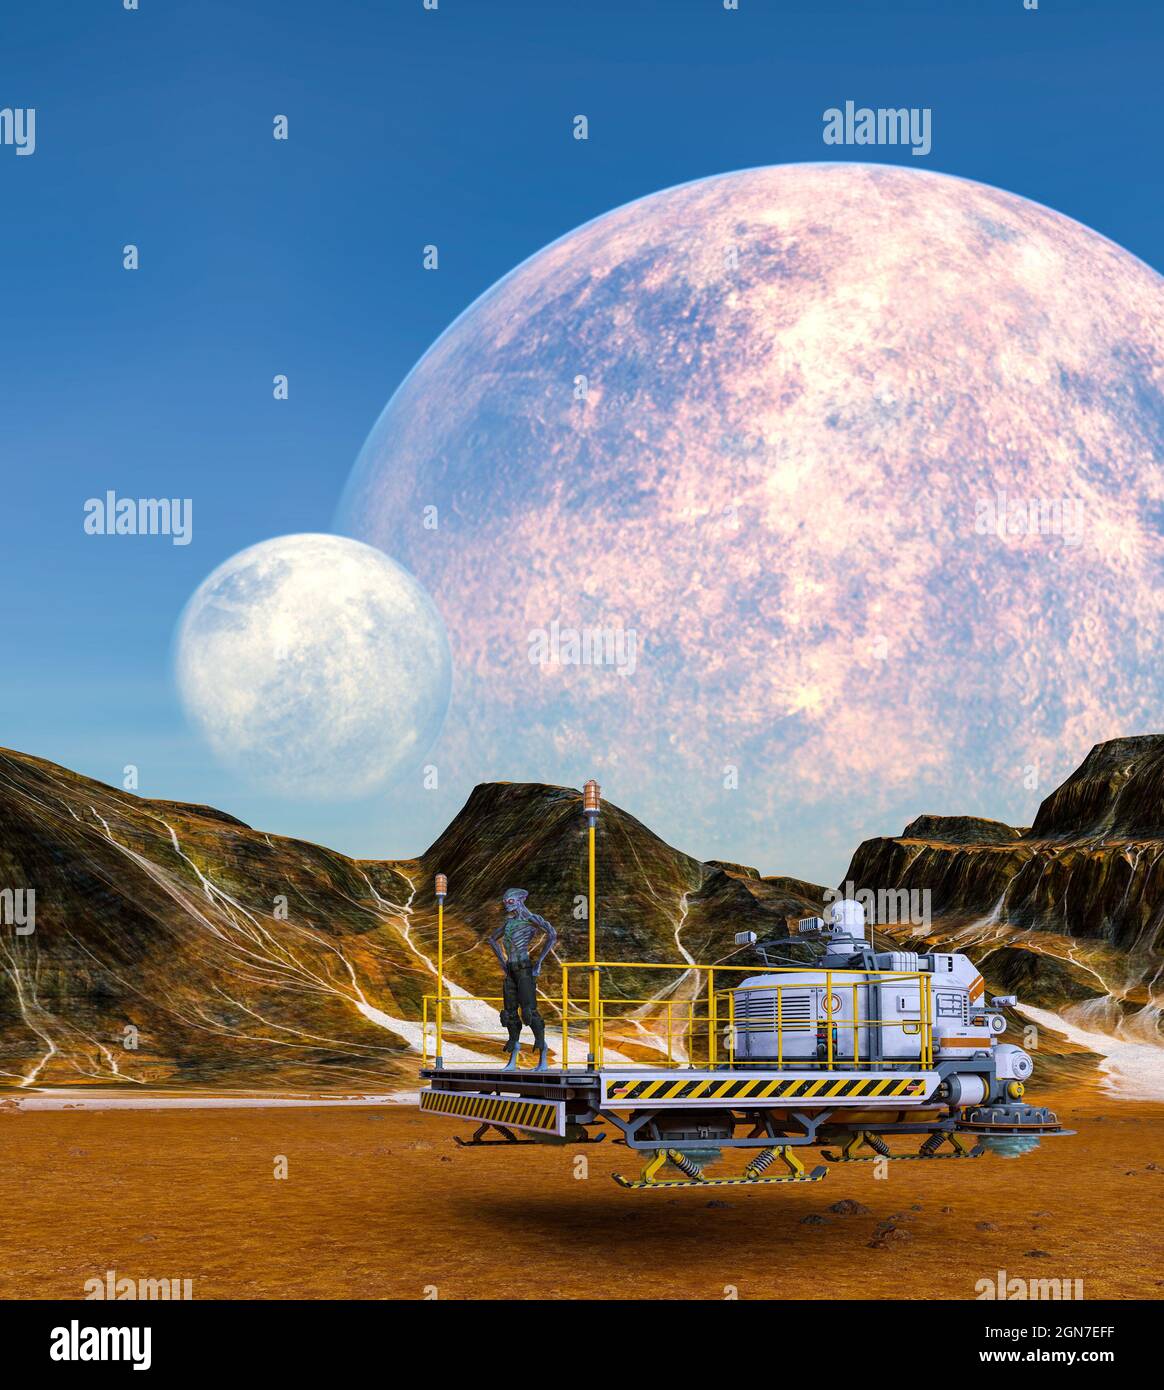 3d illustration of an extraterrestrial standing on a mining platform with a planet and moon rising in the background. Stock Photo